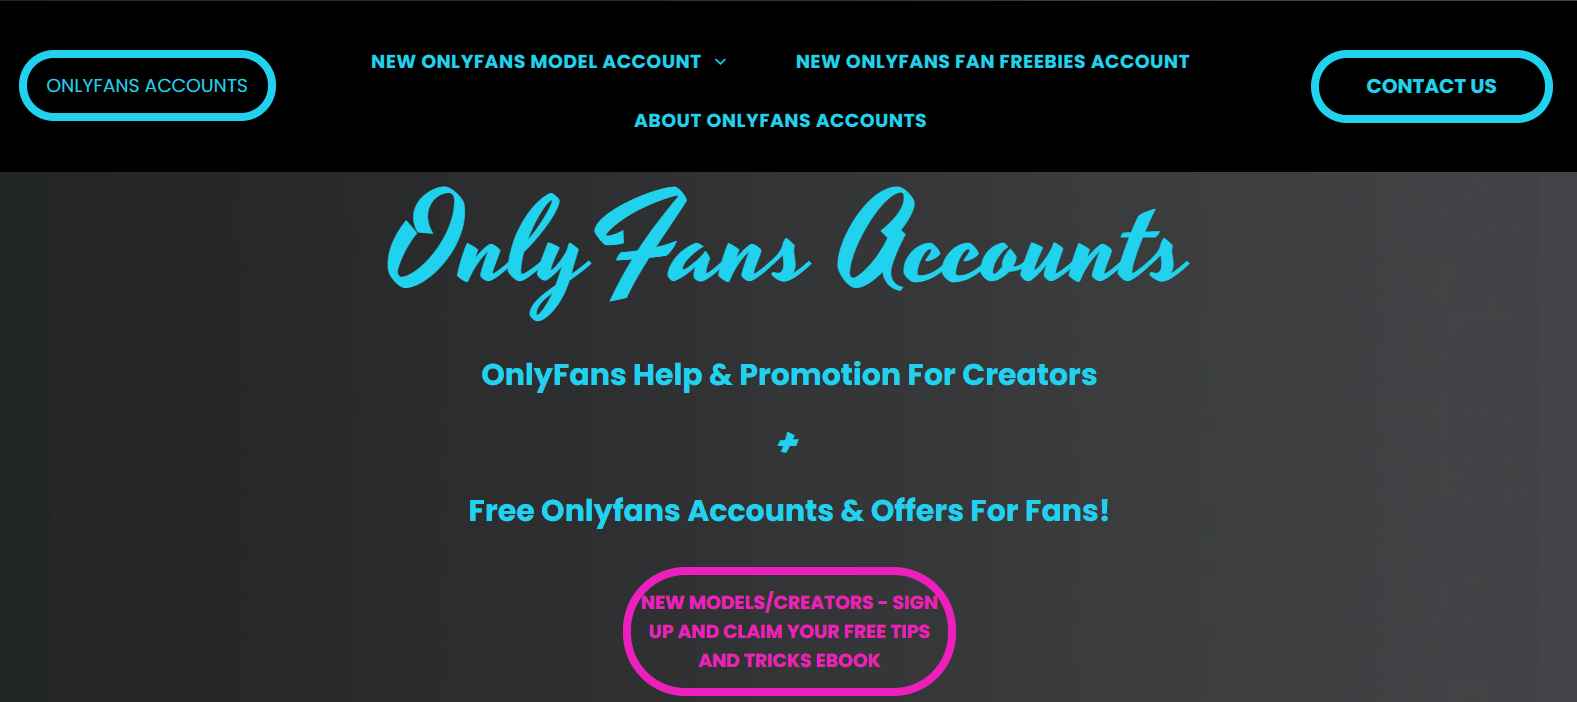 How to get onlyfans accounts free